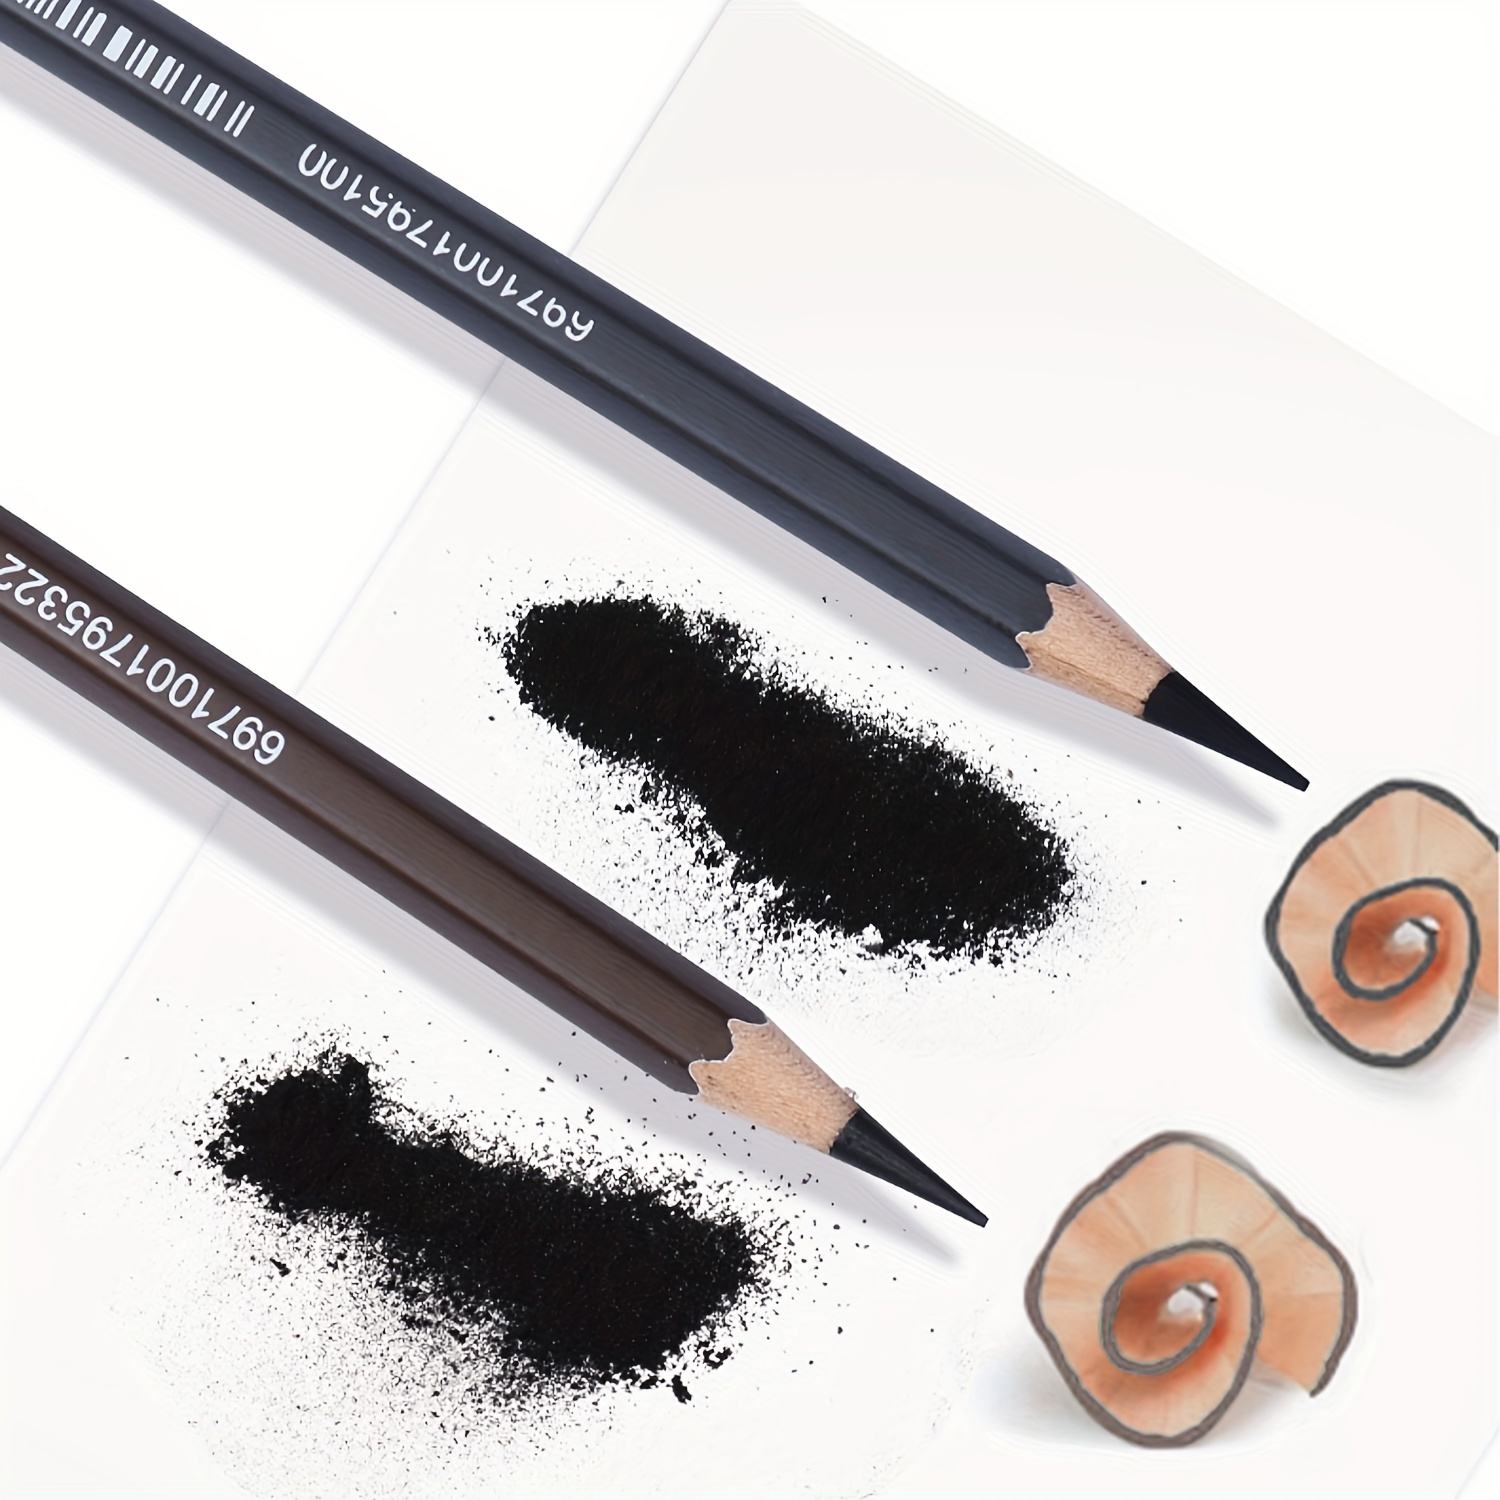 Buy MISULOVE Professional Charcoal Pencils Drawing Set - 12 Pieces Super  Soft, Soft, Medium and Hard Pencils for Landscape Drawing, Sketching,  Shading, Portraits, Still-Lifes for Beginners & Artists Online at  desertcartINDIA